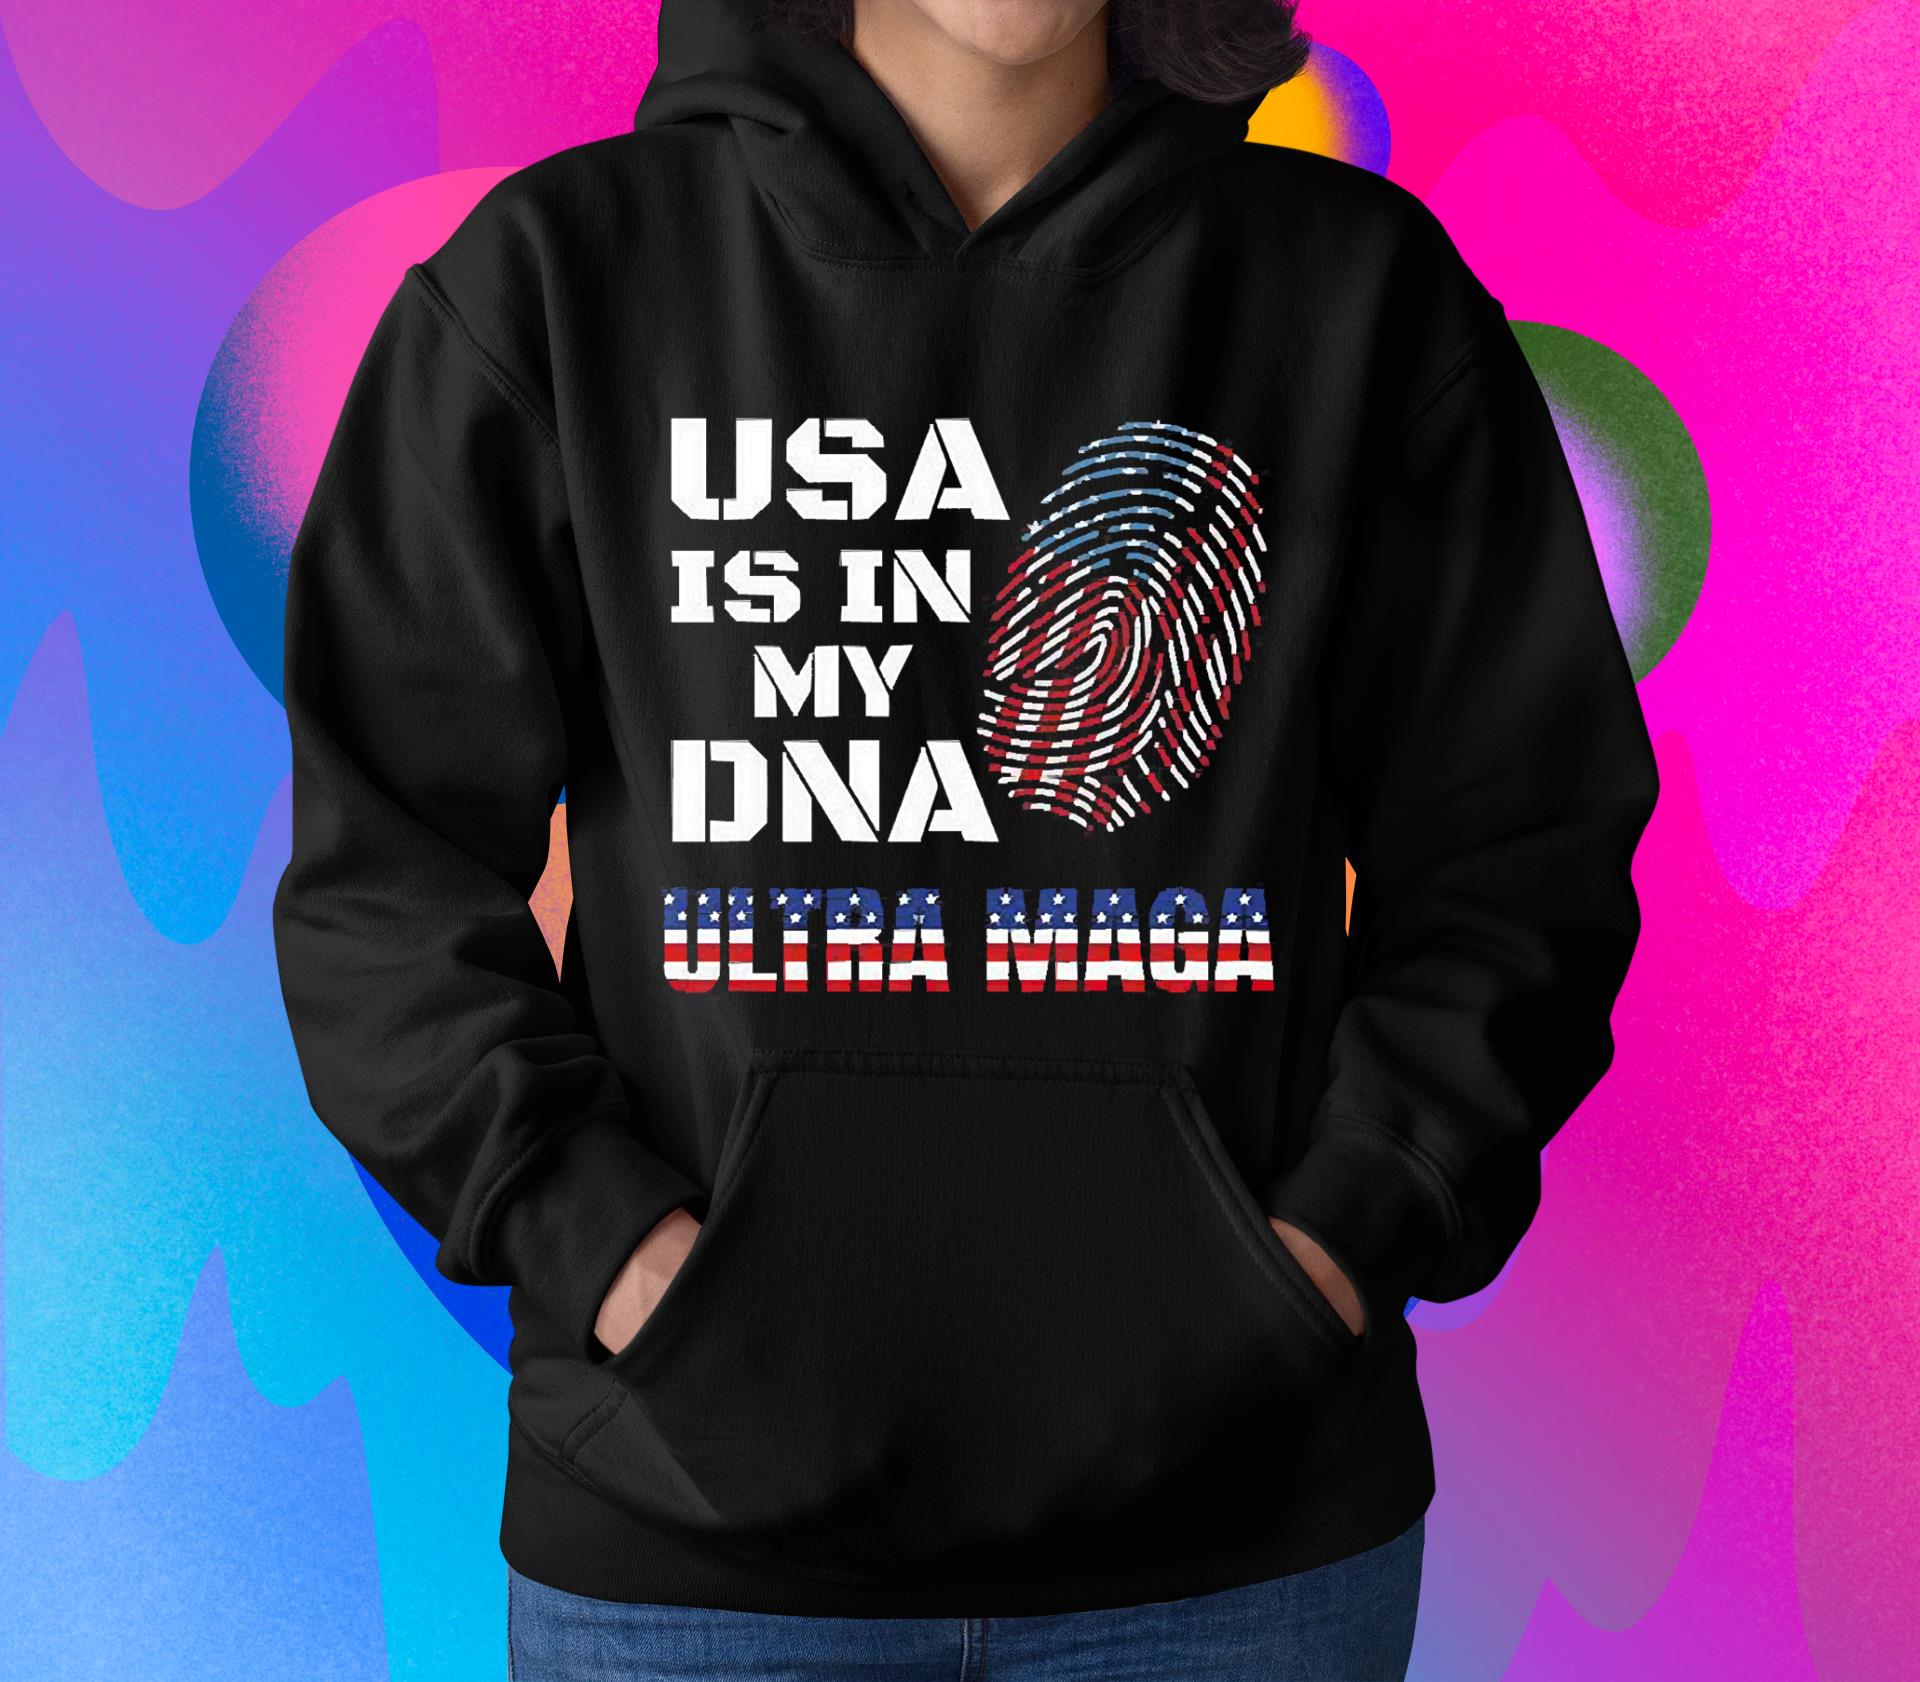 Ultra Maga USA is in my DNA proud American Shirt